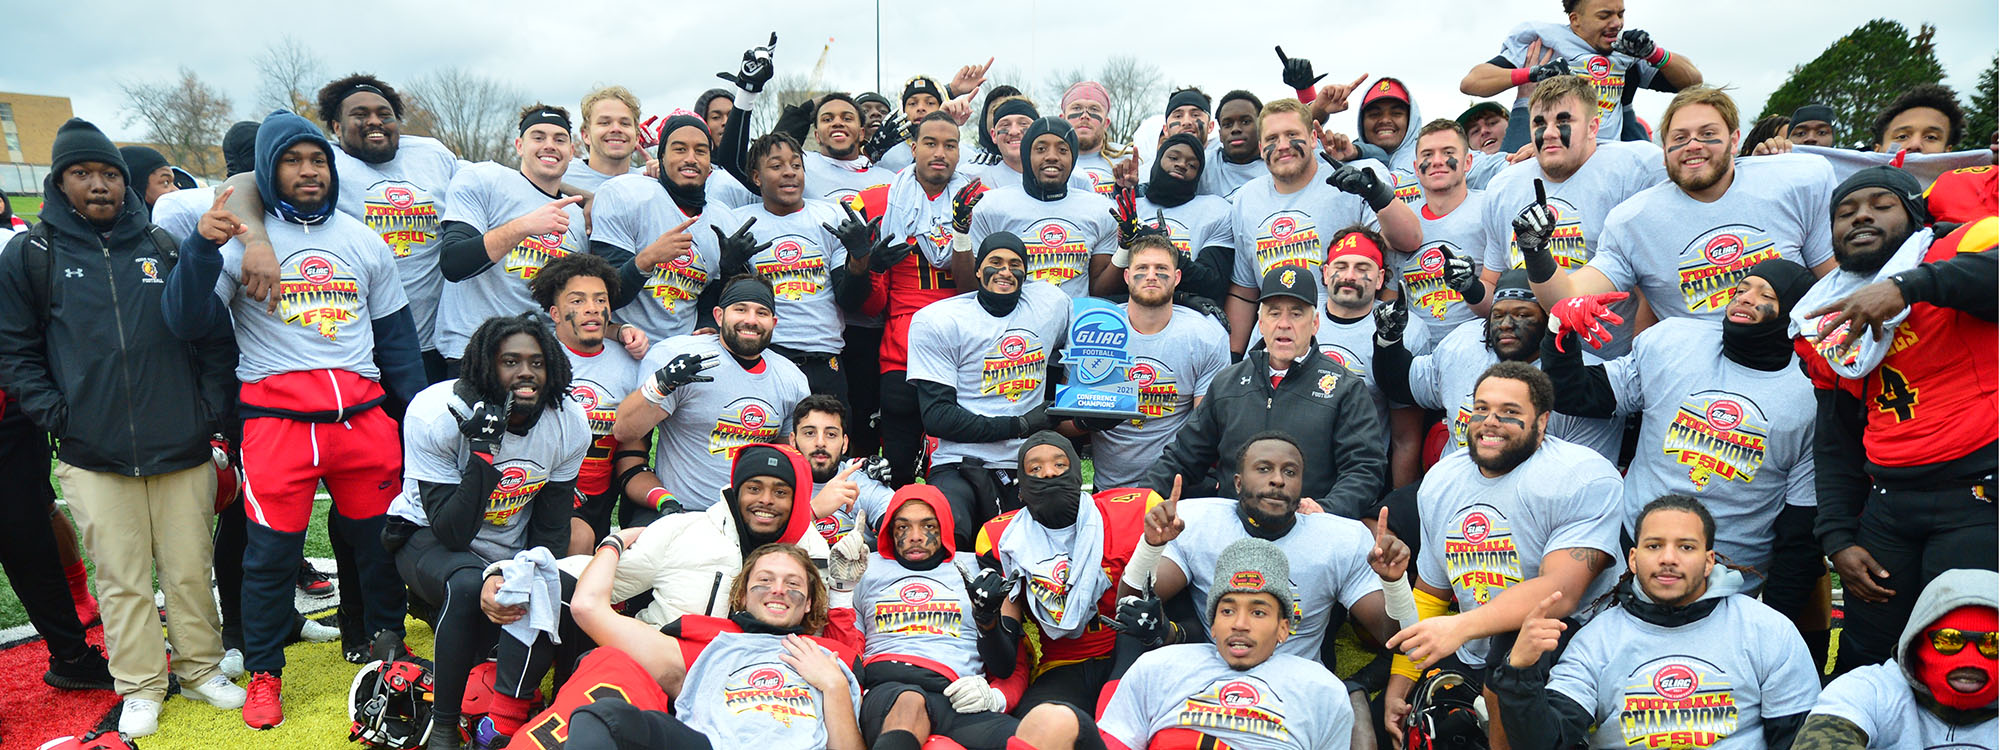 Ferris State claims GLIAC Football Championship outright; completes undefeated regular season